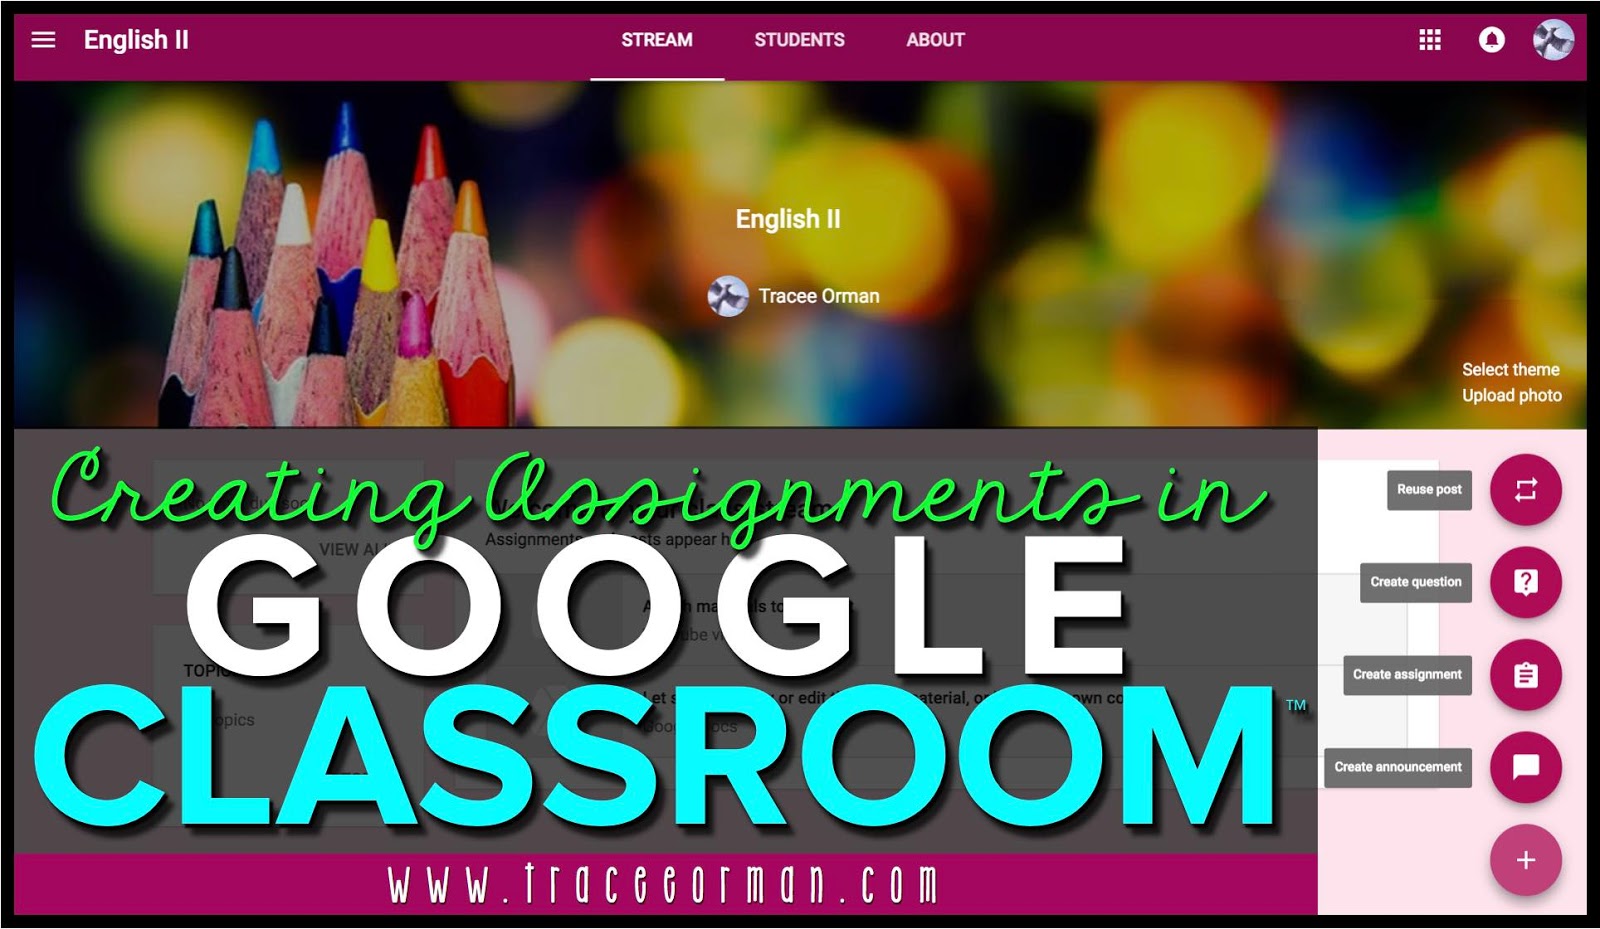 Mrs. Orman's Classroom: Creating Assignments in Google Classroom™1600 x 929